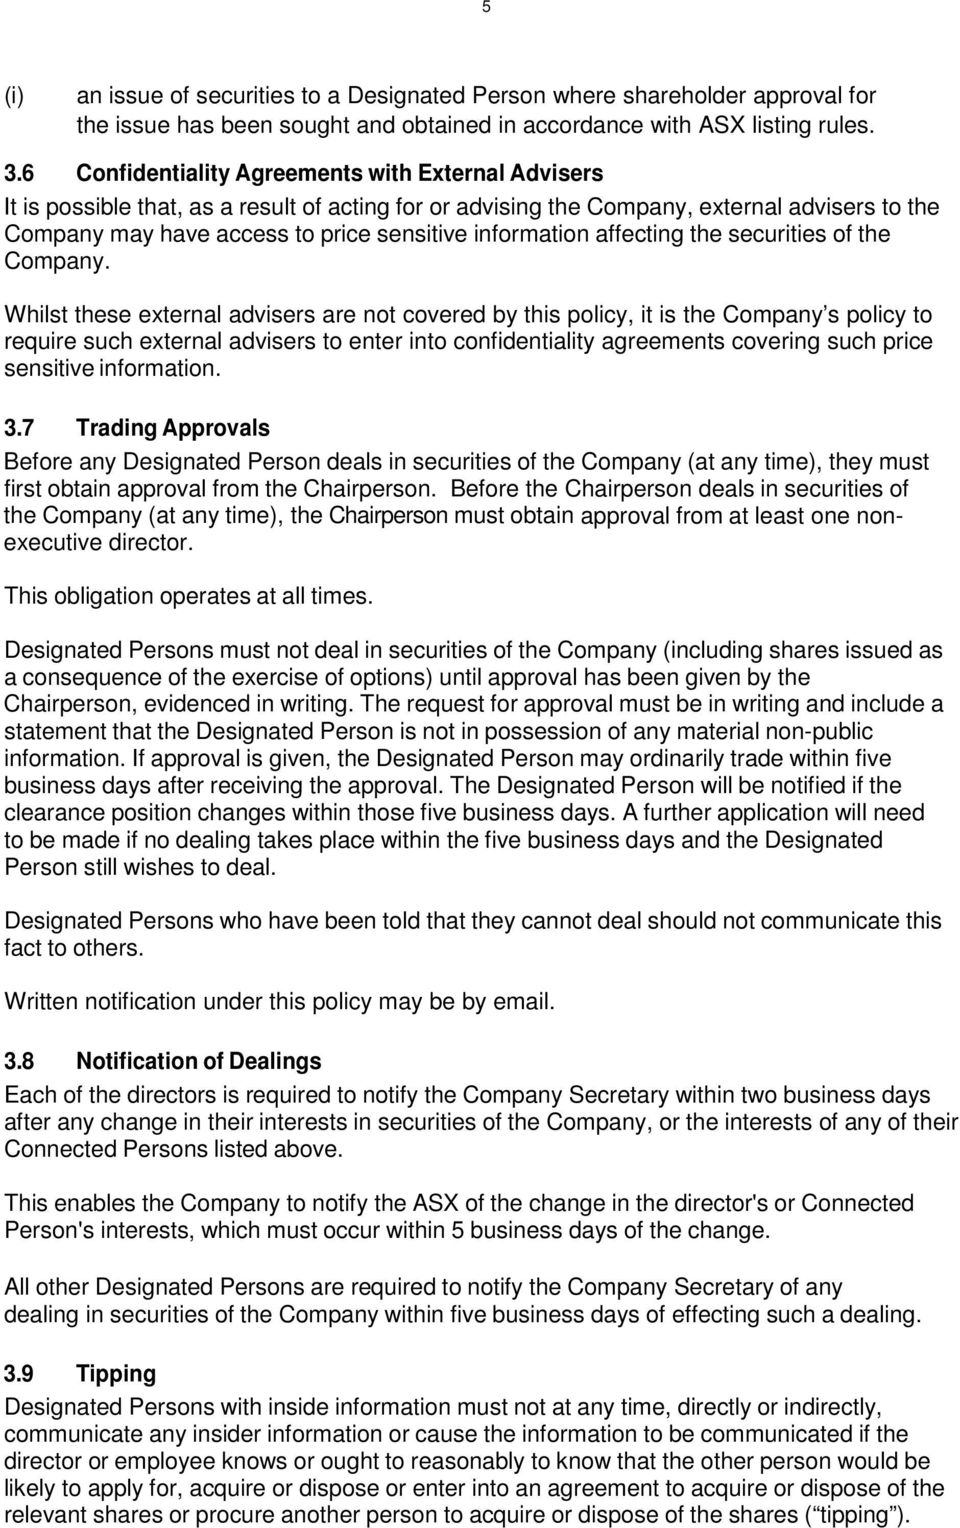 information affecting the securities of the Company.